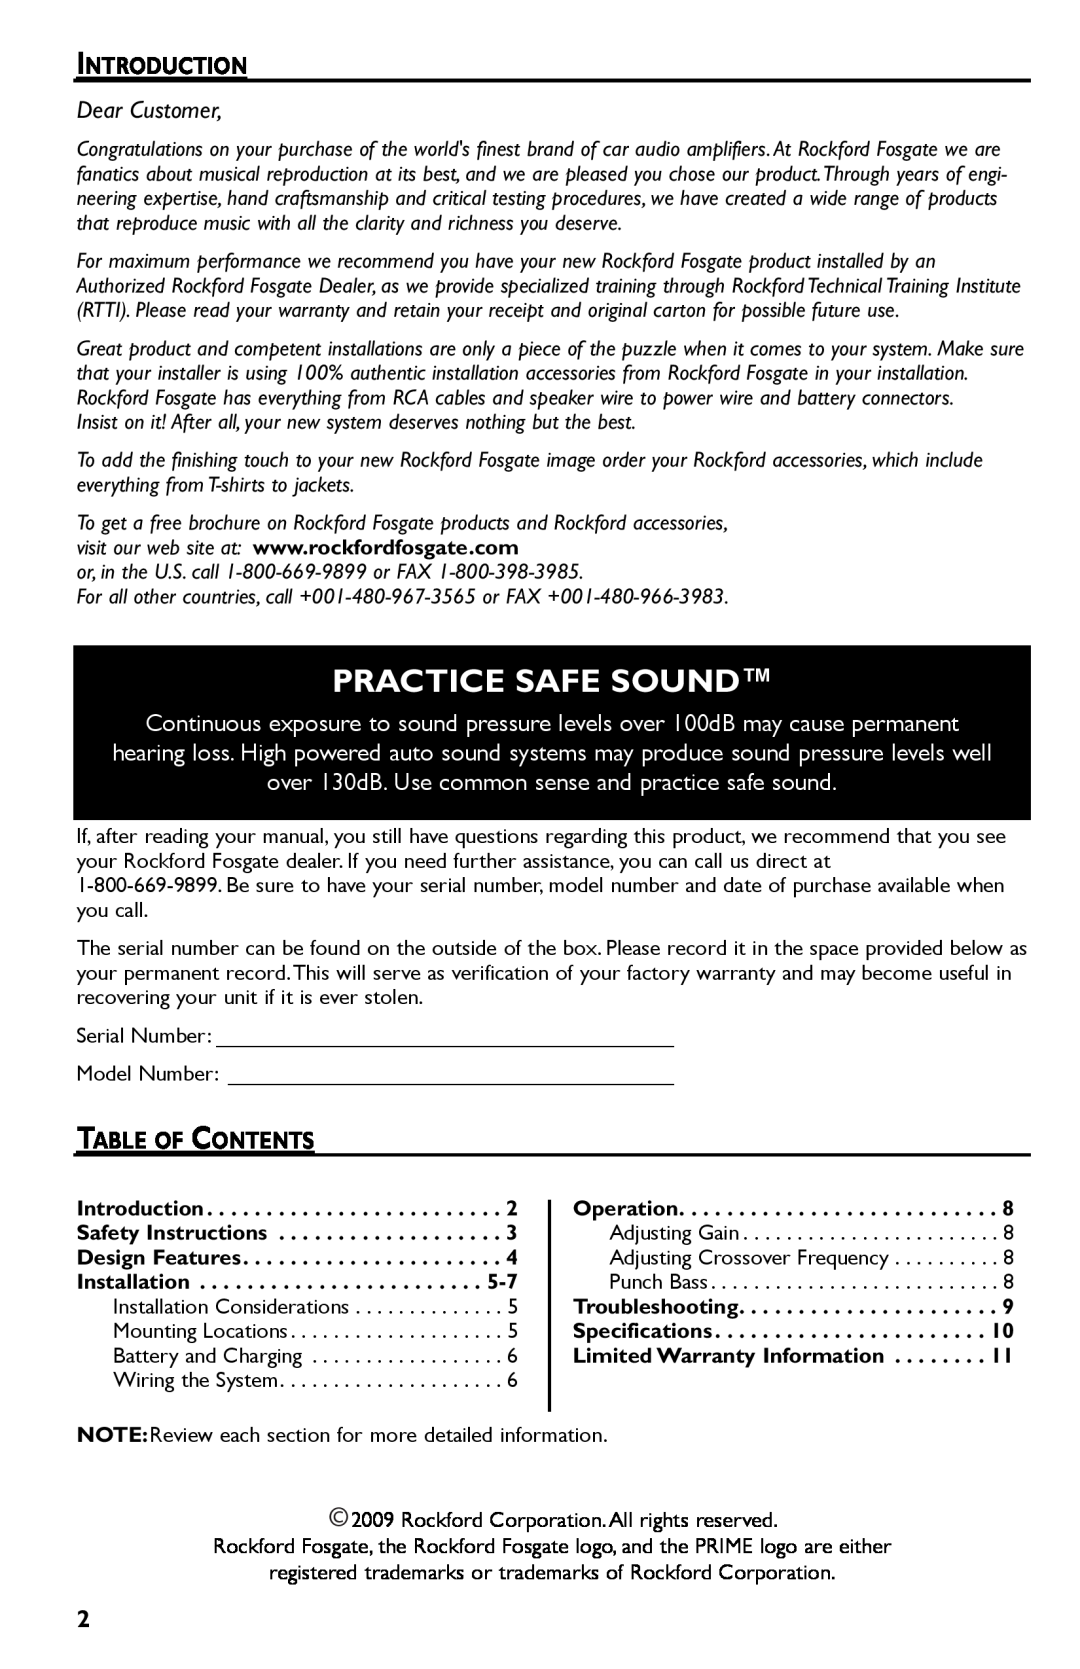 Rockford Fosgate R300-4 manual Practice Safe Sound, Introduction, Table Of Contents 